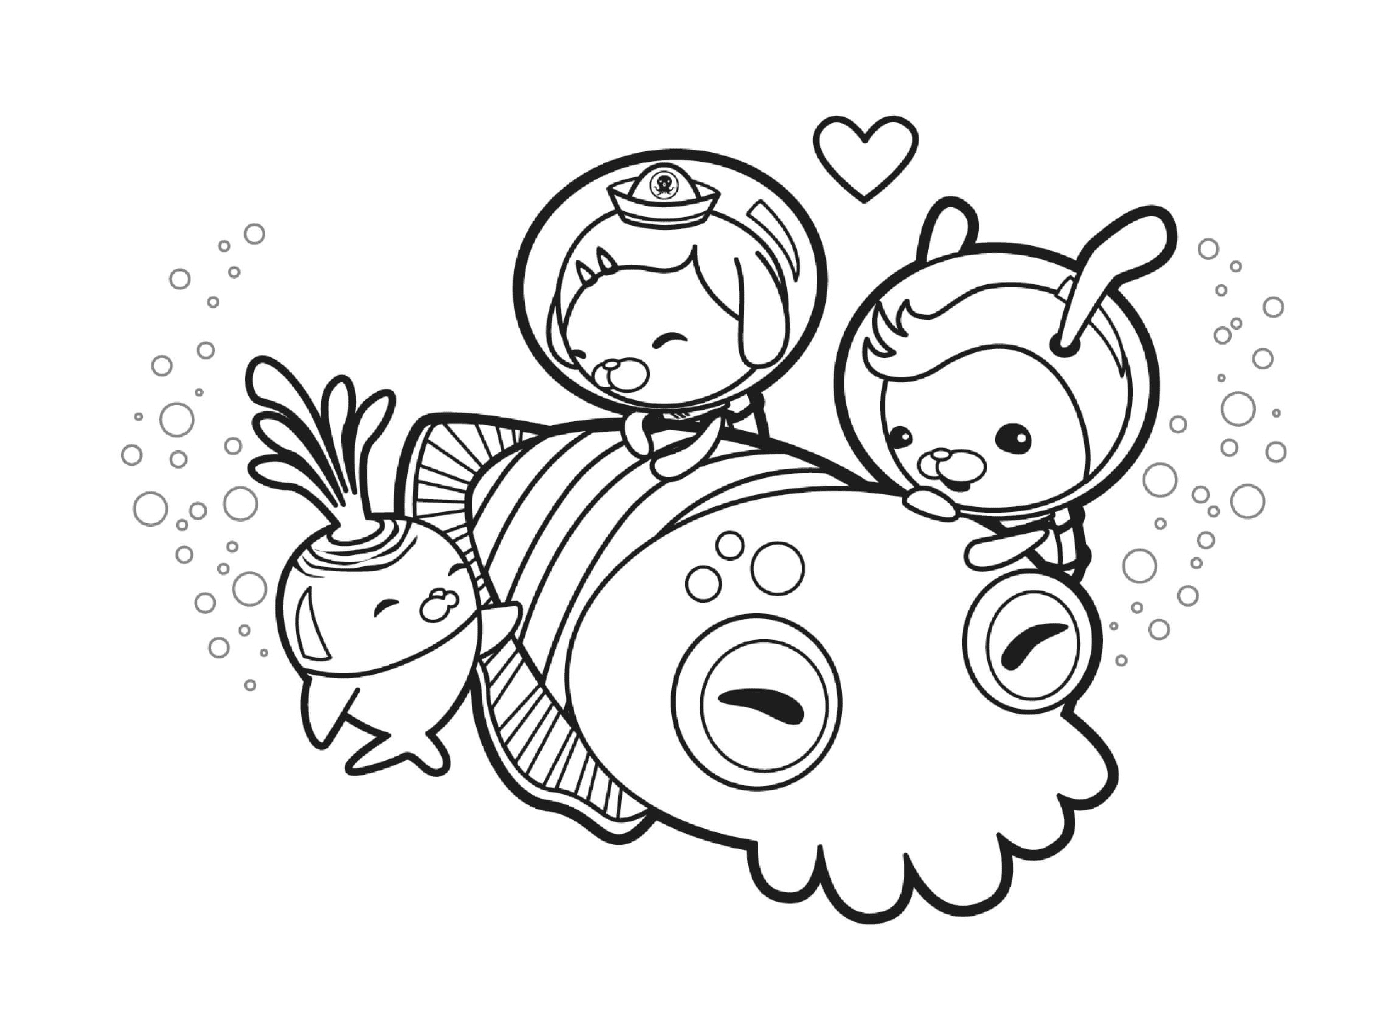 cuddle with a cuttlefish octonauts